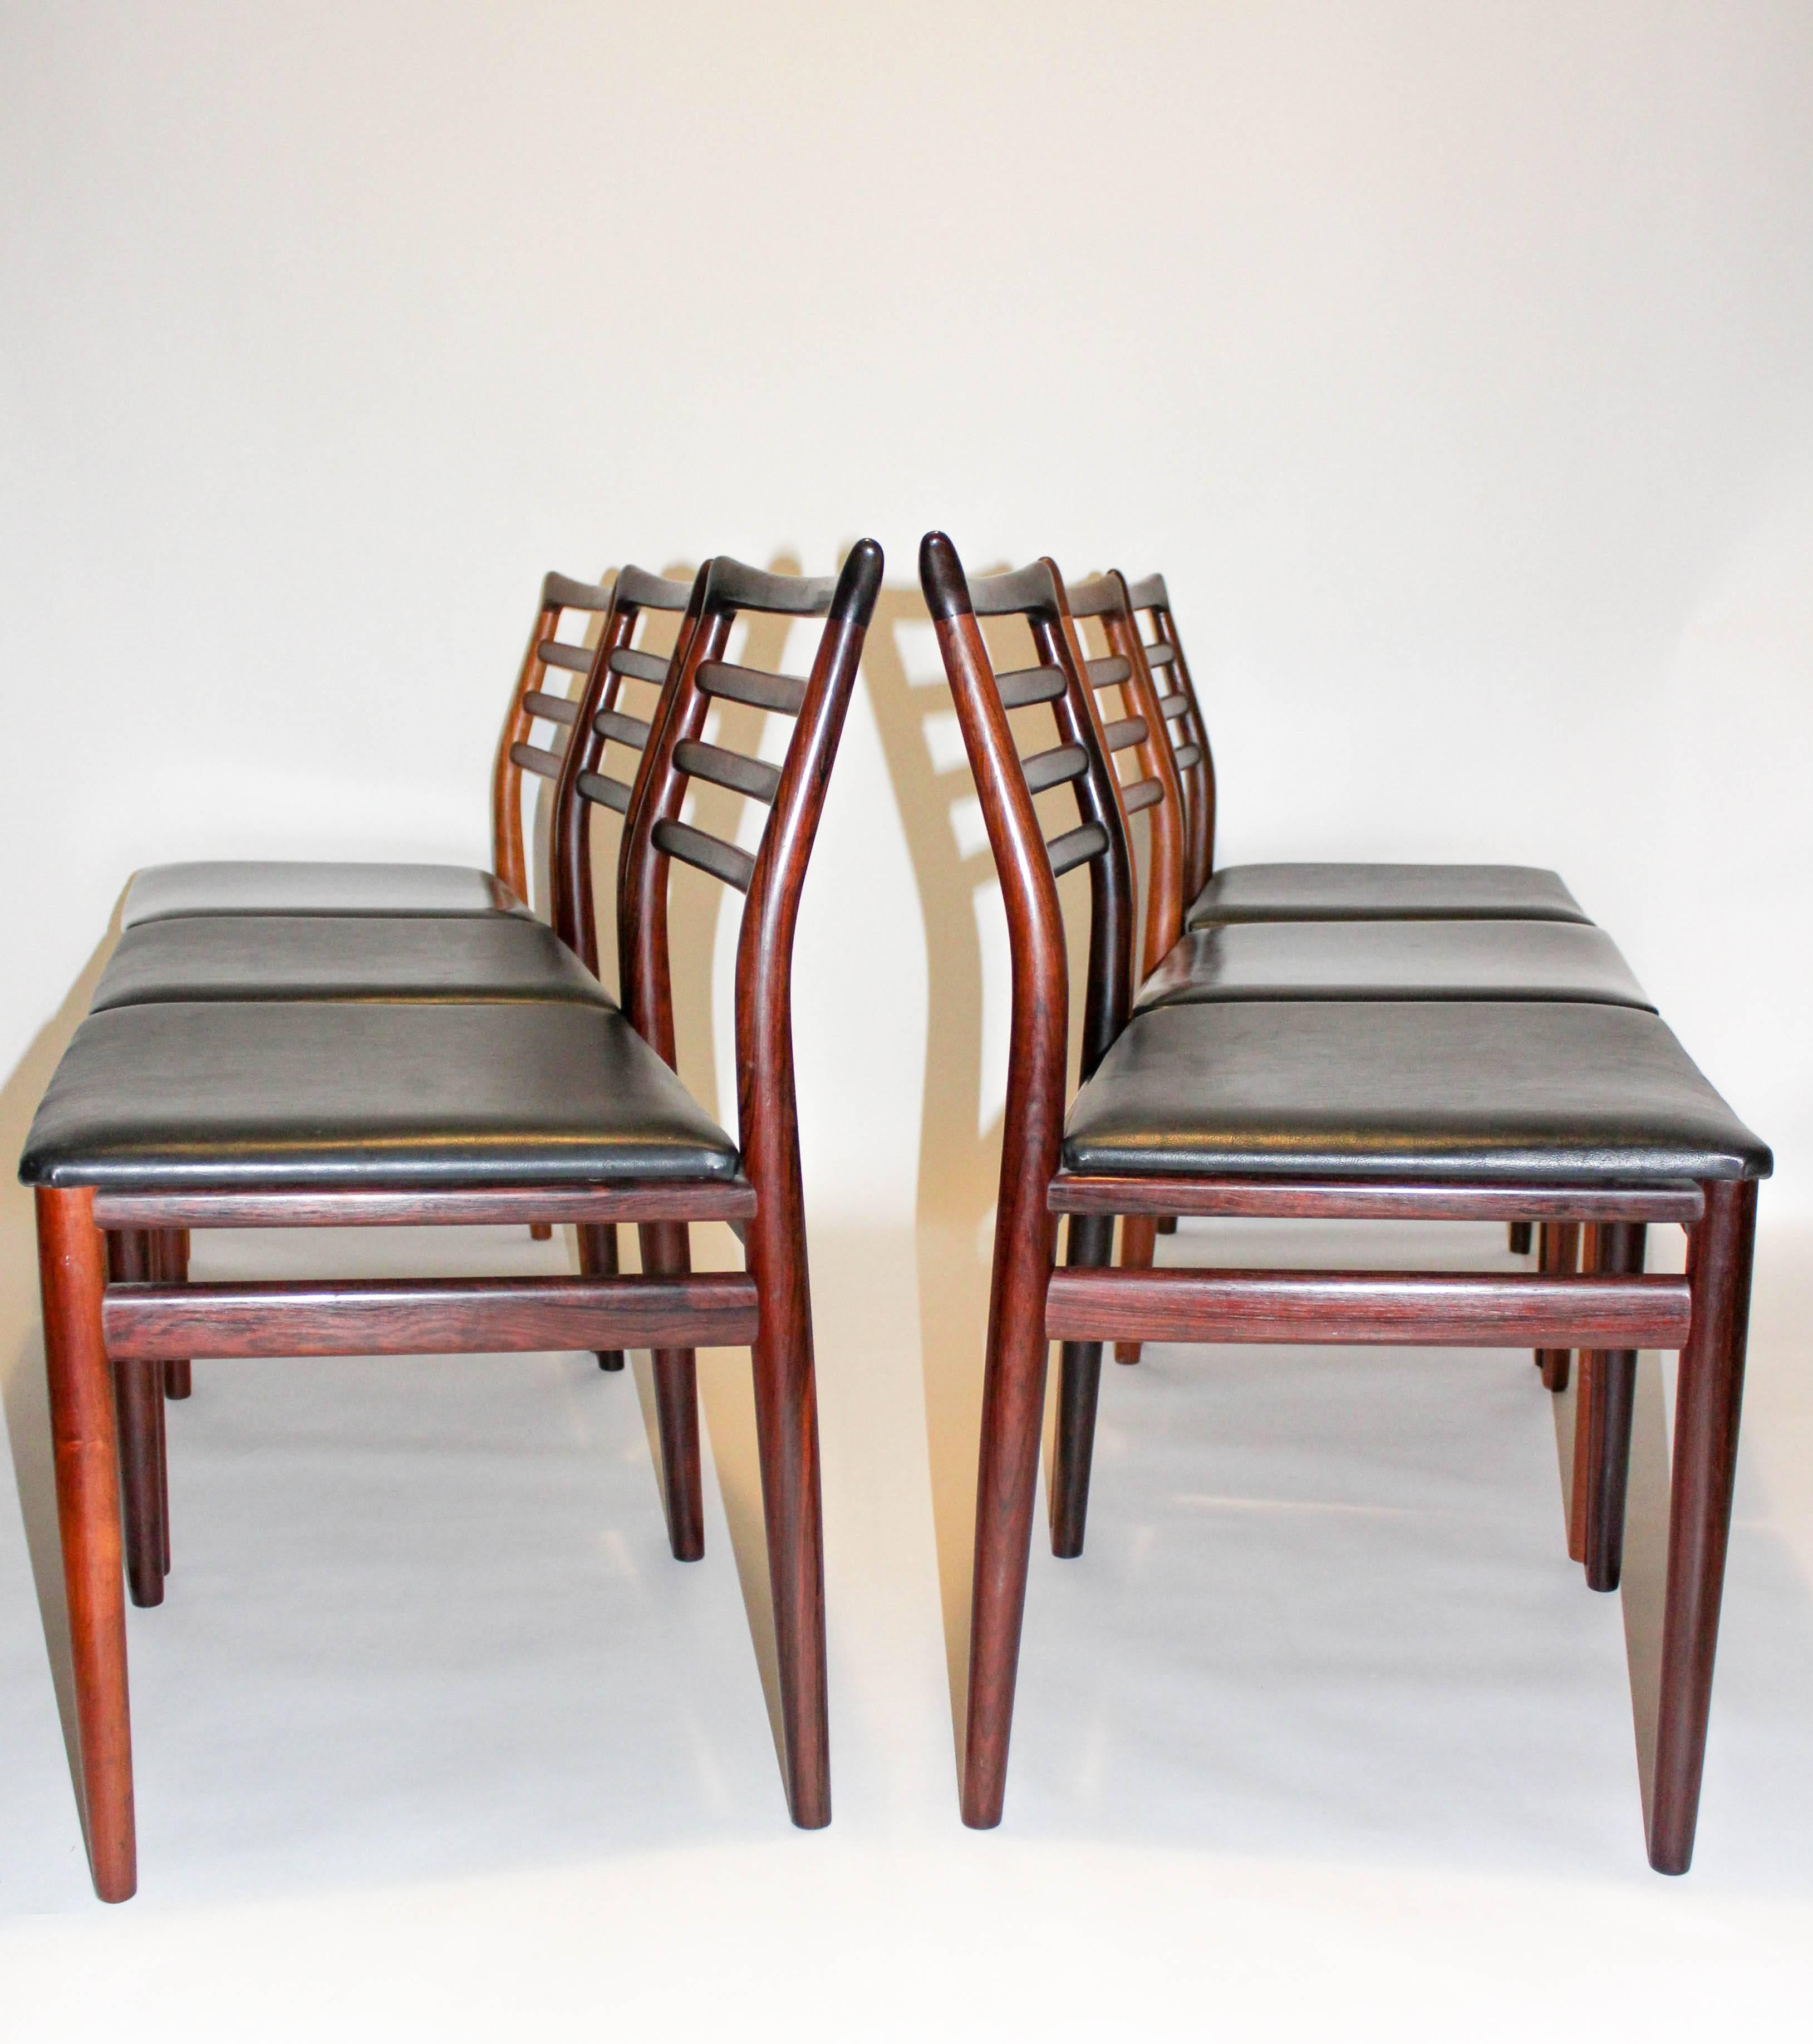 Midcentury Danish design chairs by Erling Tovits. These high quality rosewood chairs was manufactured by Sorø stolefabrik in the 1960s. Very goos vintage condition with original upholstery.